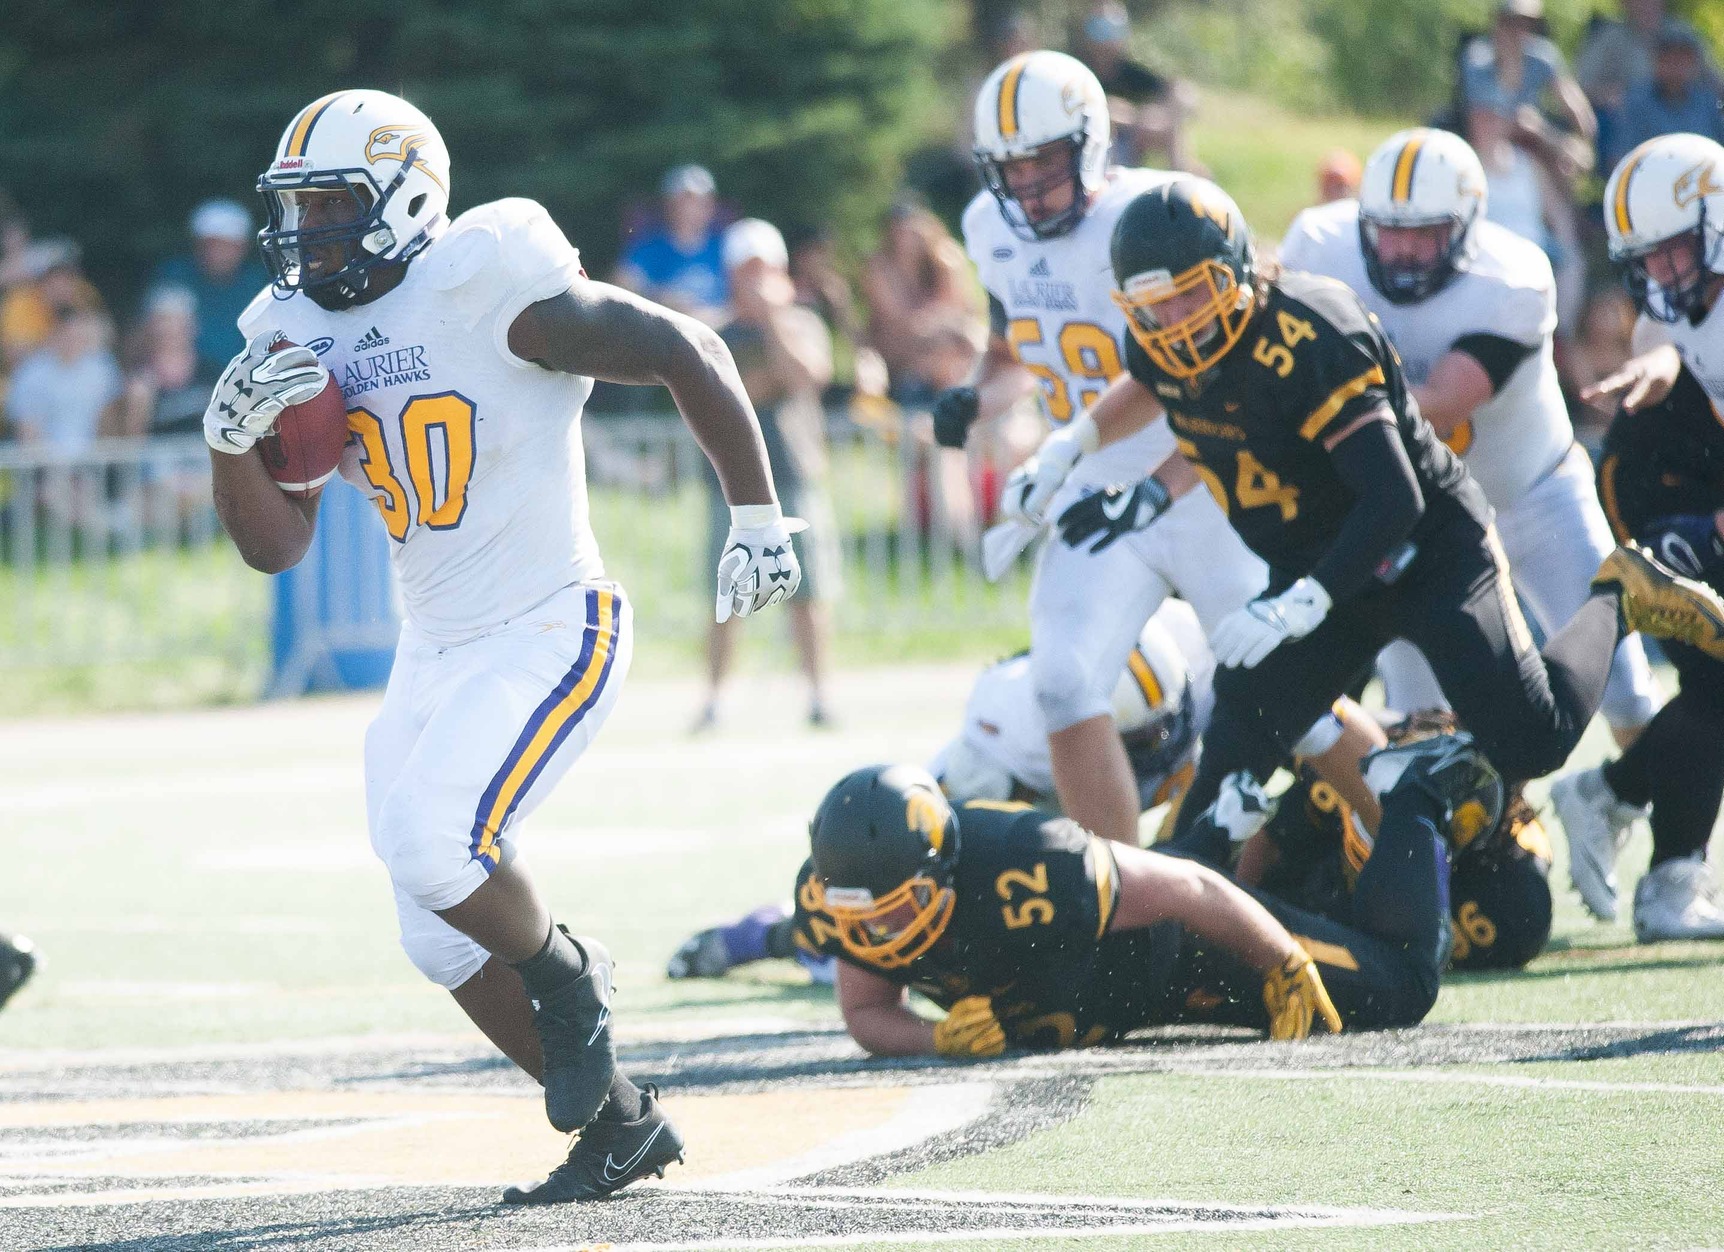 Phot By: Kha Vo / Laurier Golden Hawks